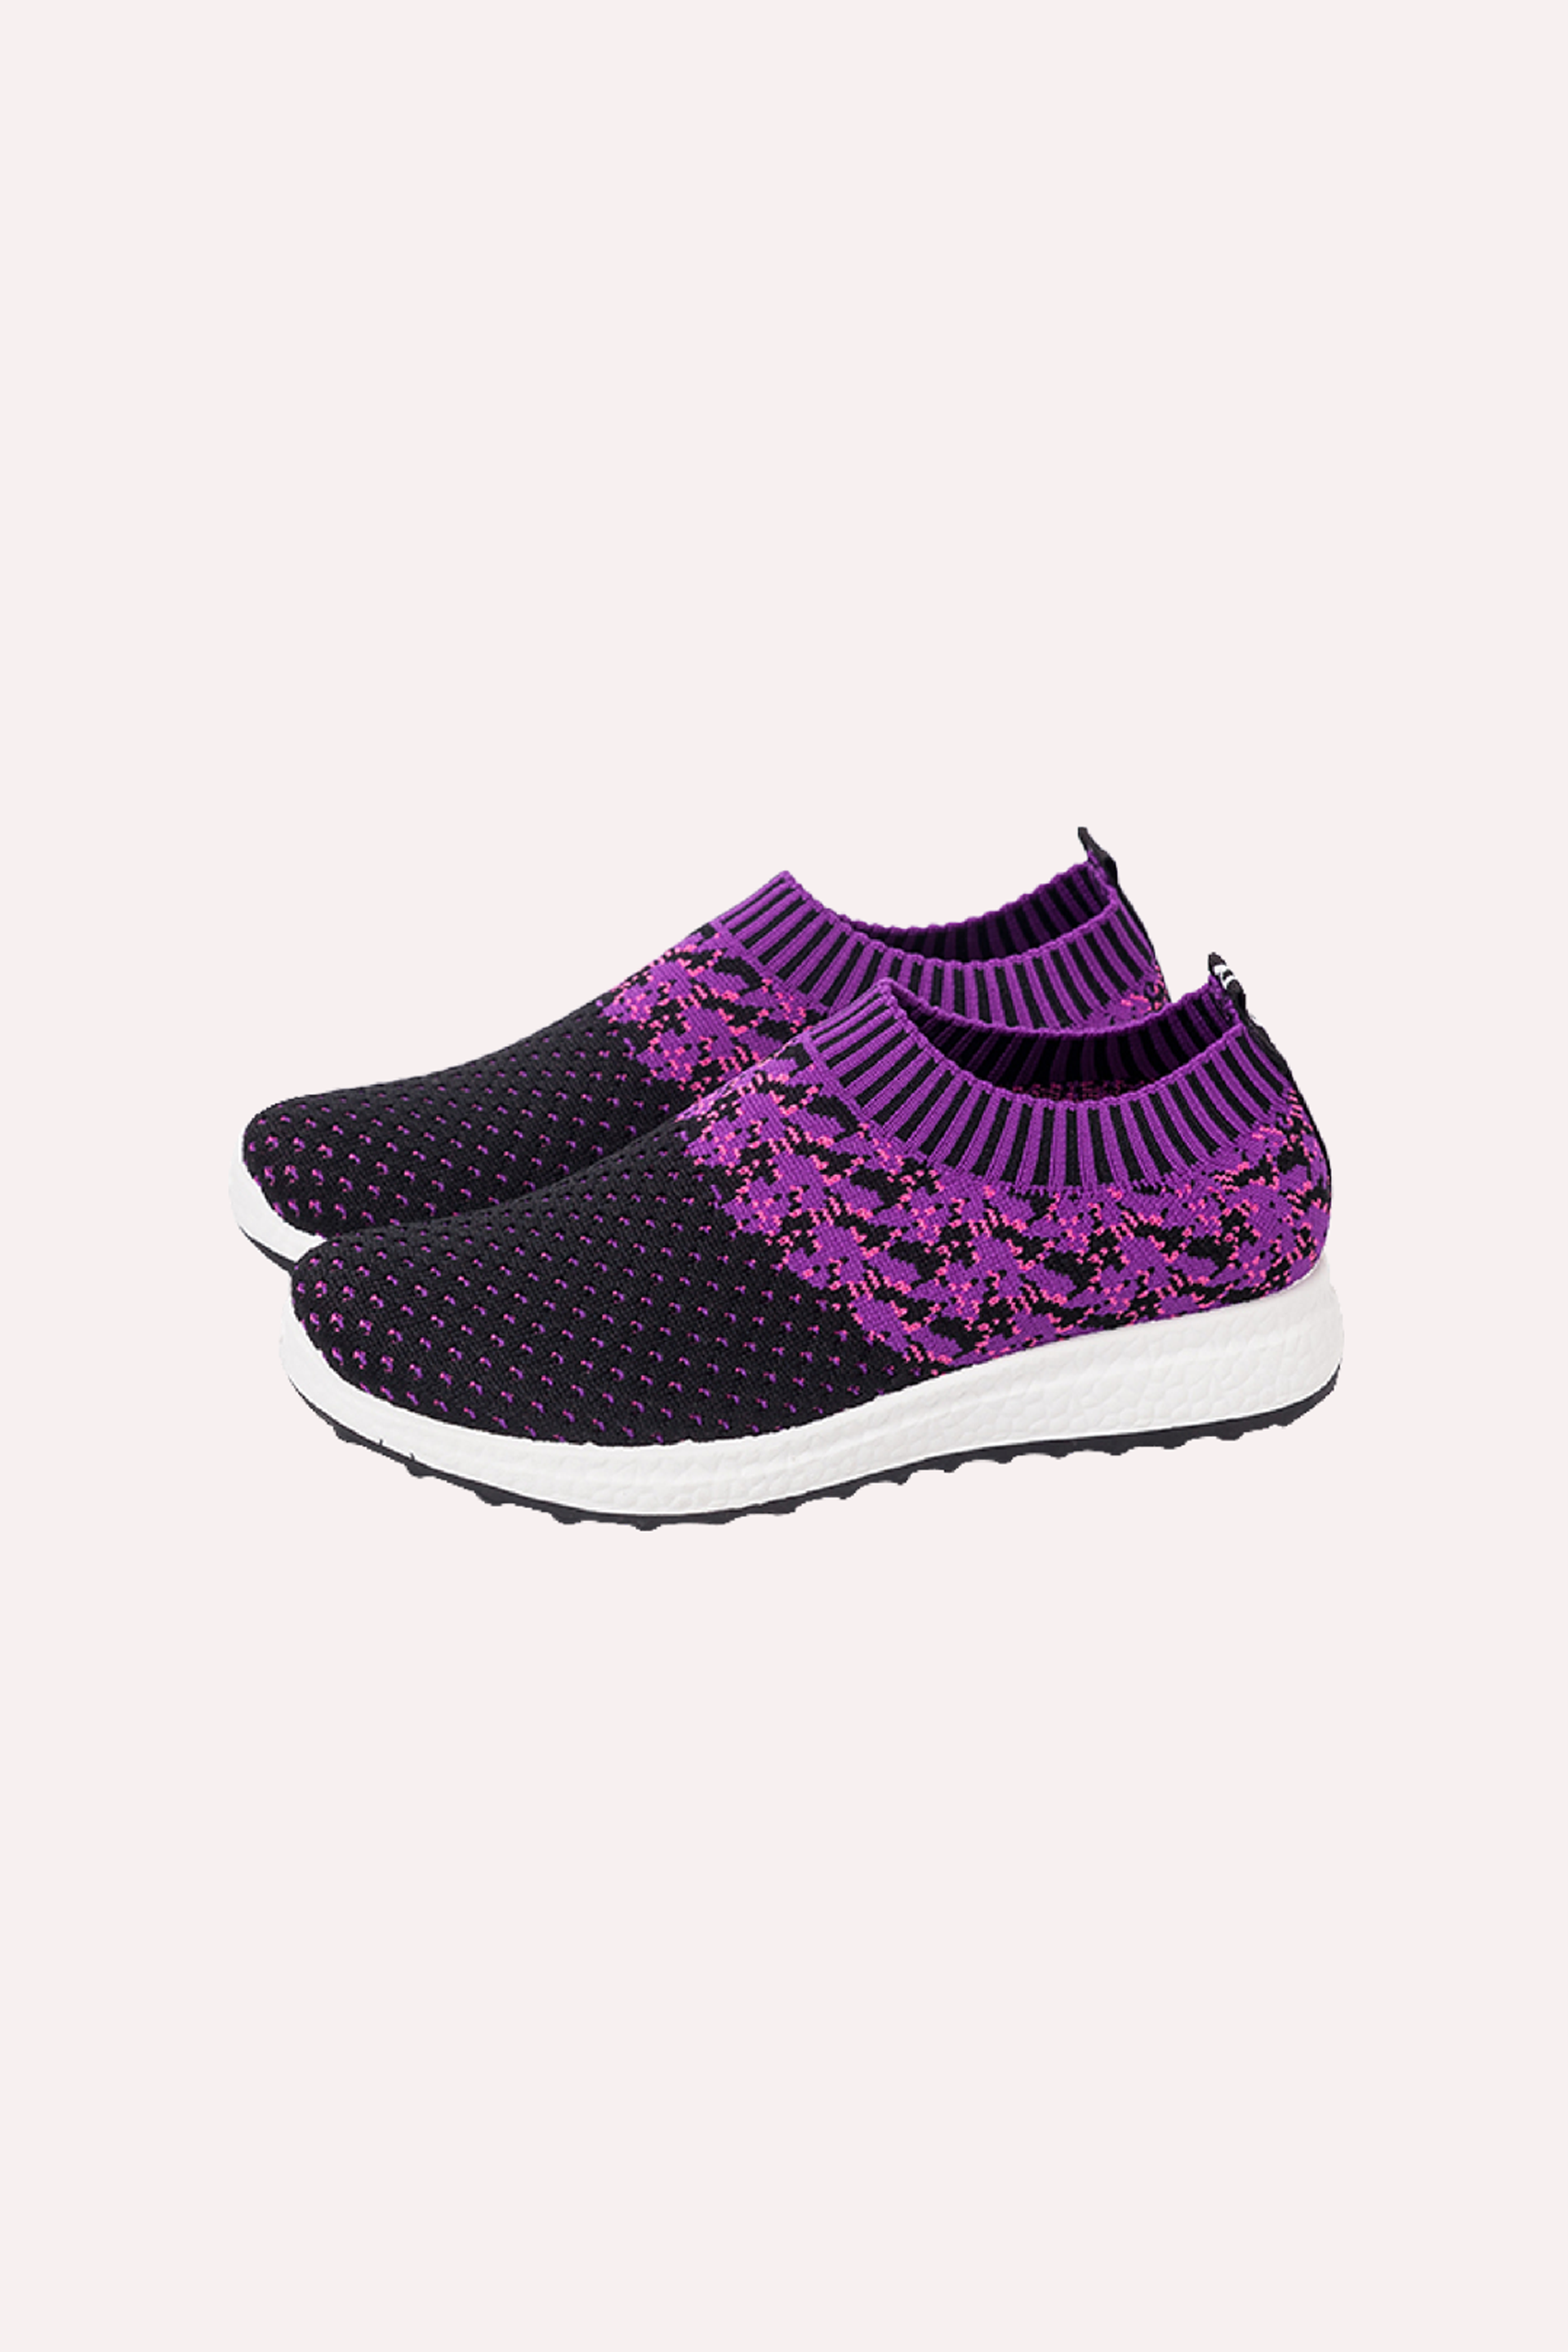 STQ Slip On Sneakers for Women Walking Shoes Comfortable Breathable Mesh